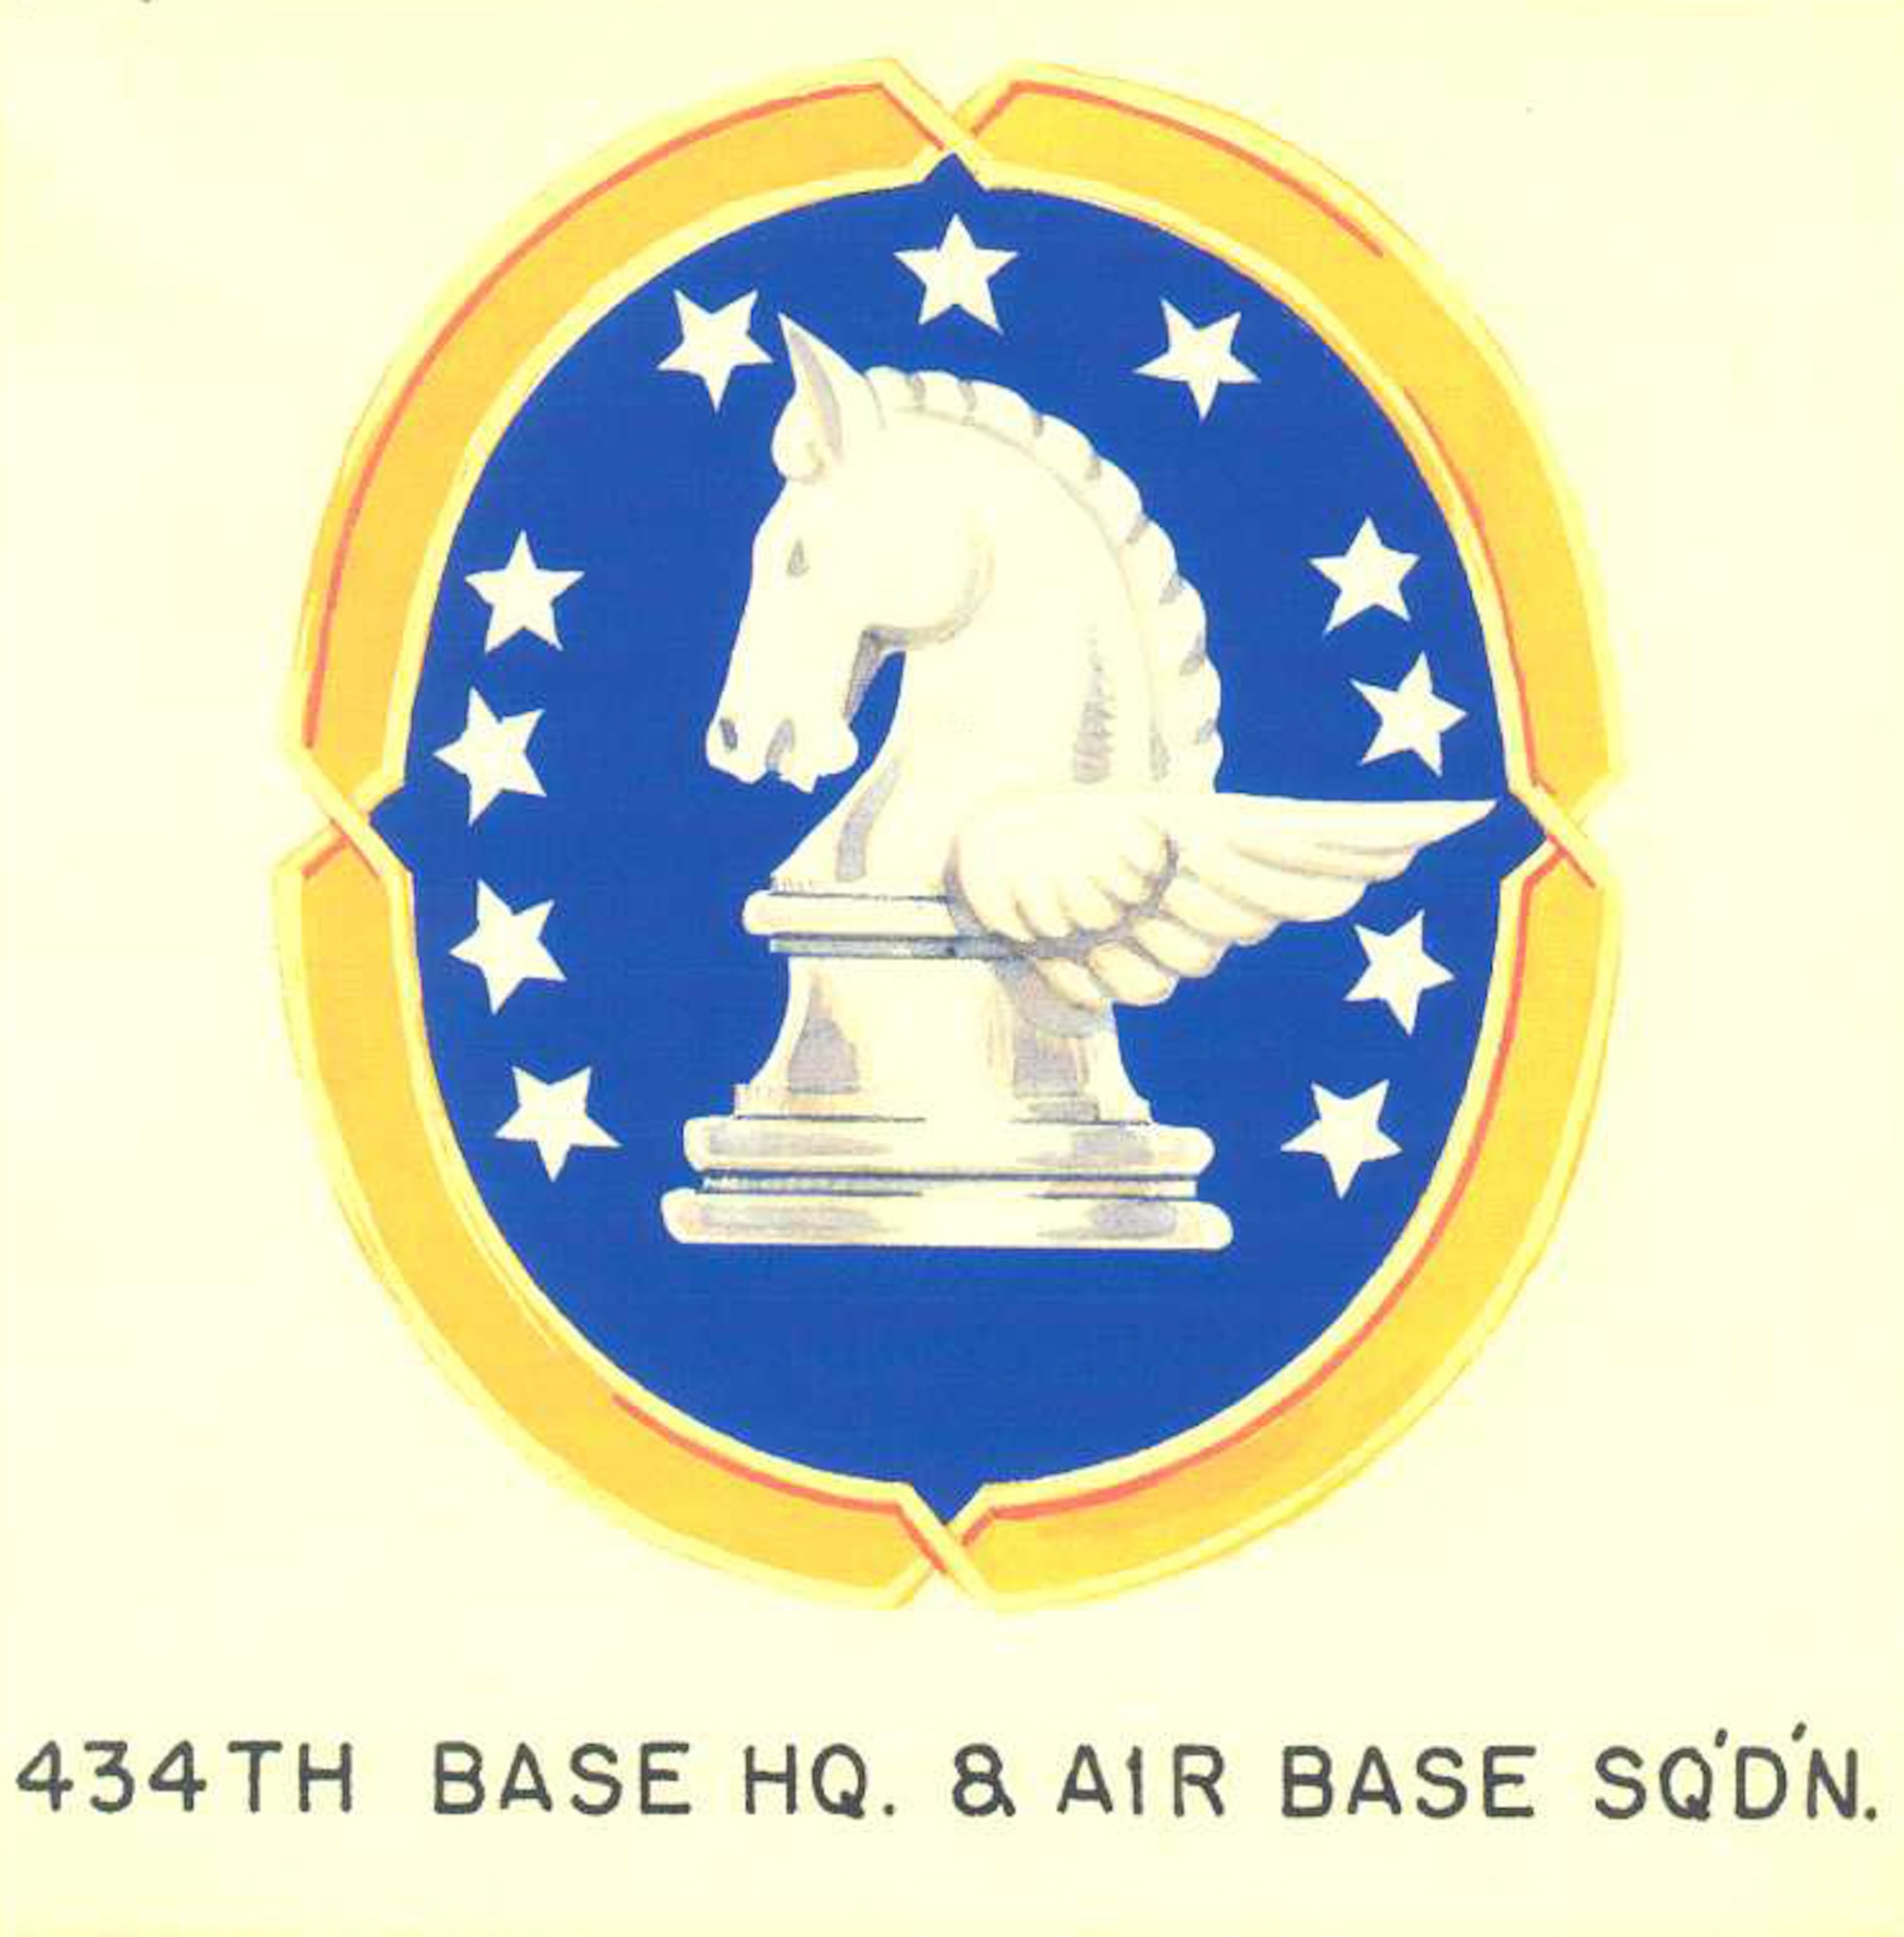 The 434th Air Refueling Wing has a 70-year history dating to World War II. The 434th was officially activated on Oct. 1, 1942 as the 434th Base Headquarters and Air Base Squadron at Mitchel Field, New York. (U.S. Air Force graphic)
